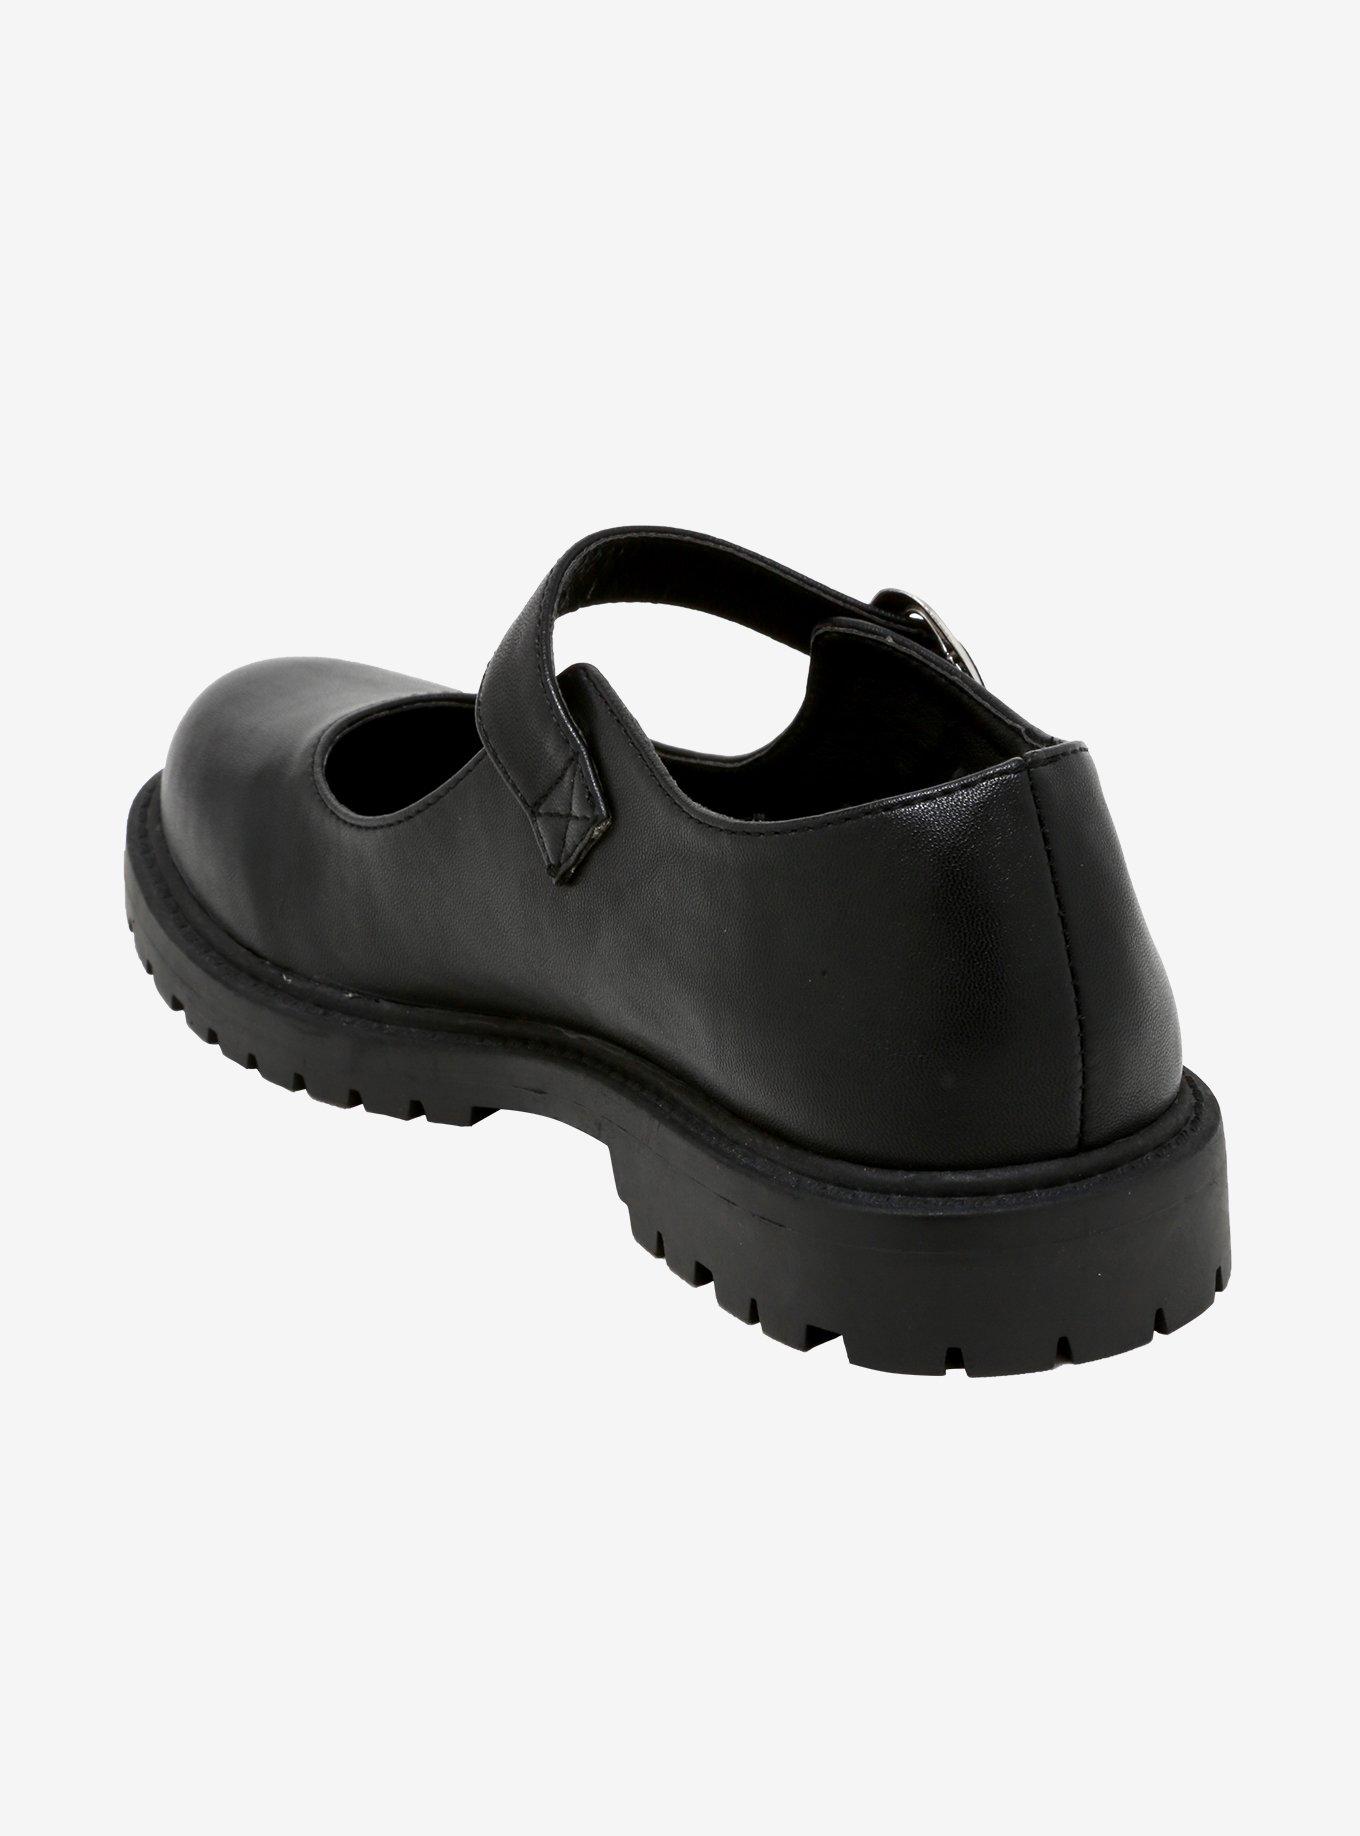 Faux Leather Mary Janes, BLACK, alternate